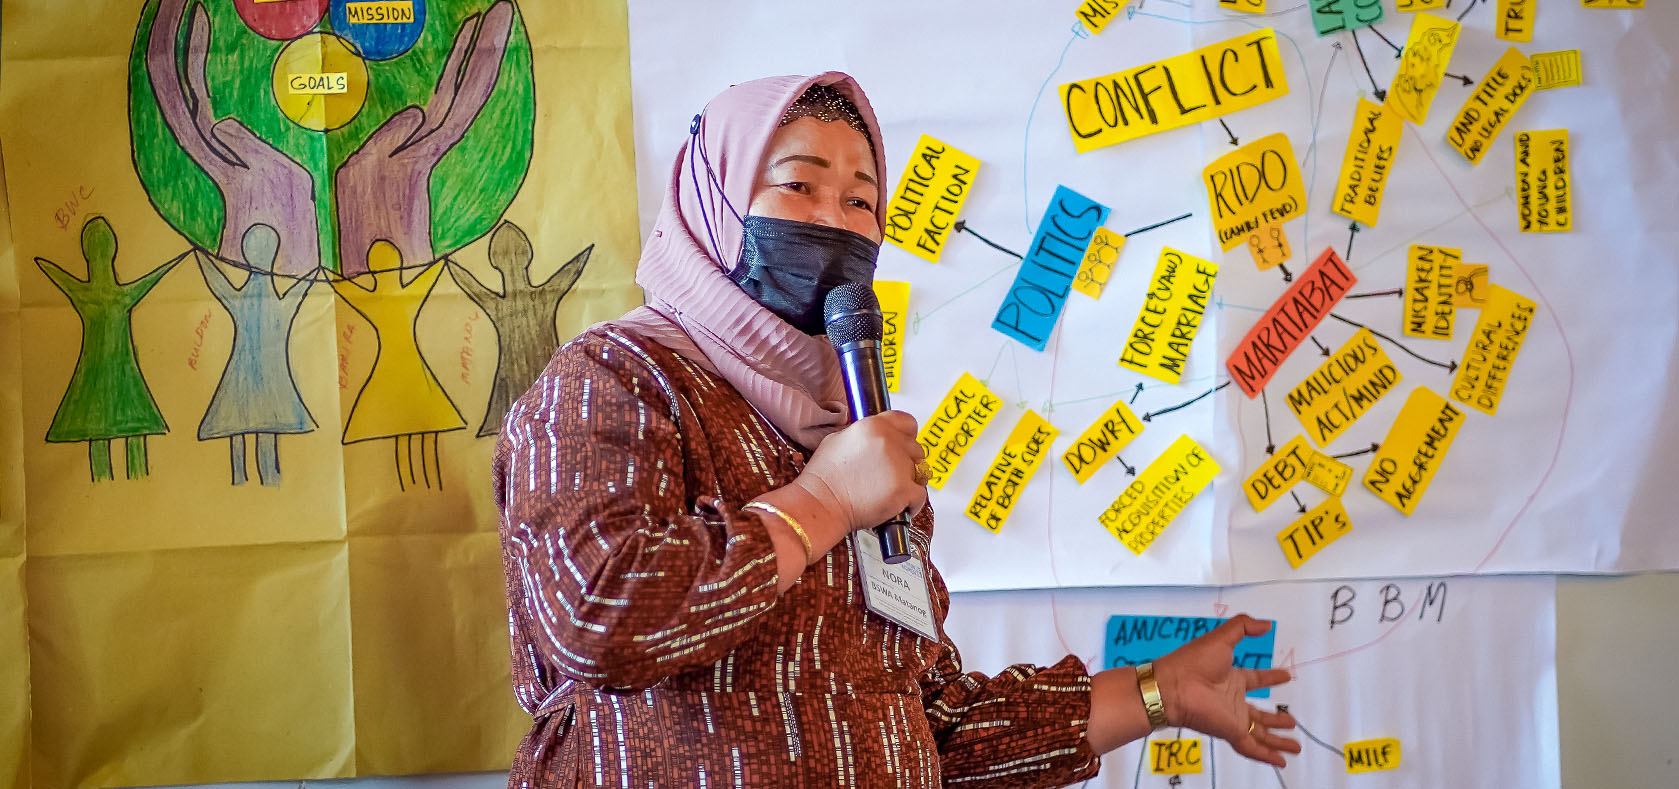 Nora Zacaria, of the civil society organization Barira, Buldon, Matanog Group of Women from Maguindanao, participates in a discussion on conflict at an event organized by UN Women. The Action Planning for Women Leaders on Conflict Affected Areas was held in Lake Sebu, South Cotabato, Philippines, on 3 August, 2021. Photo: UN Women/Louie Pacardo